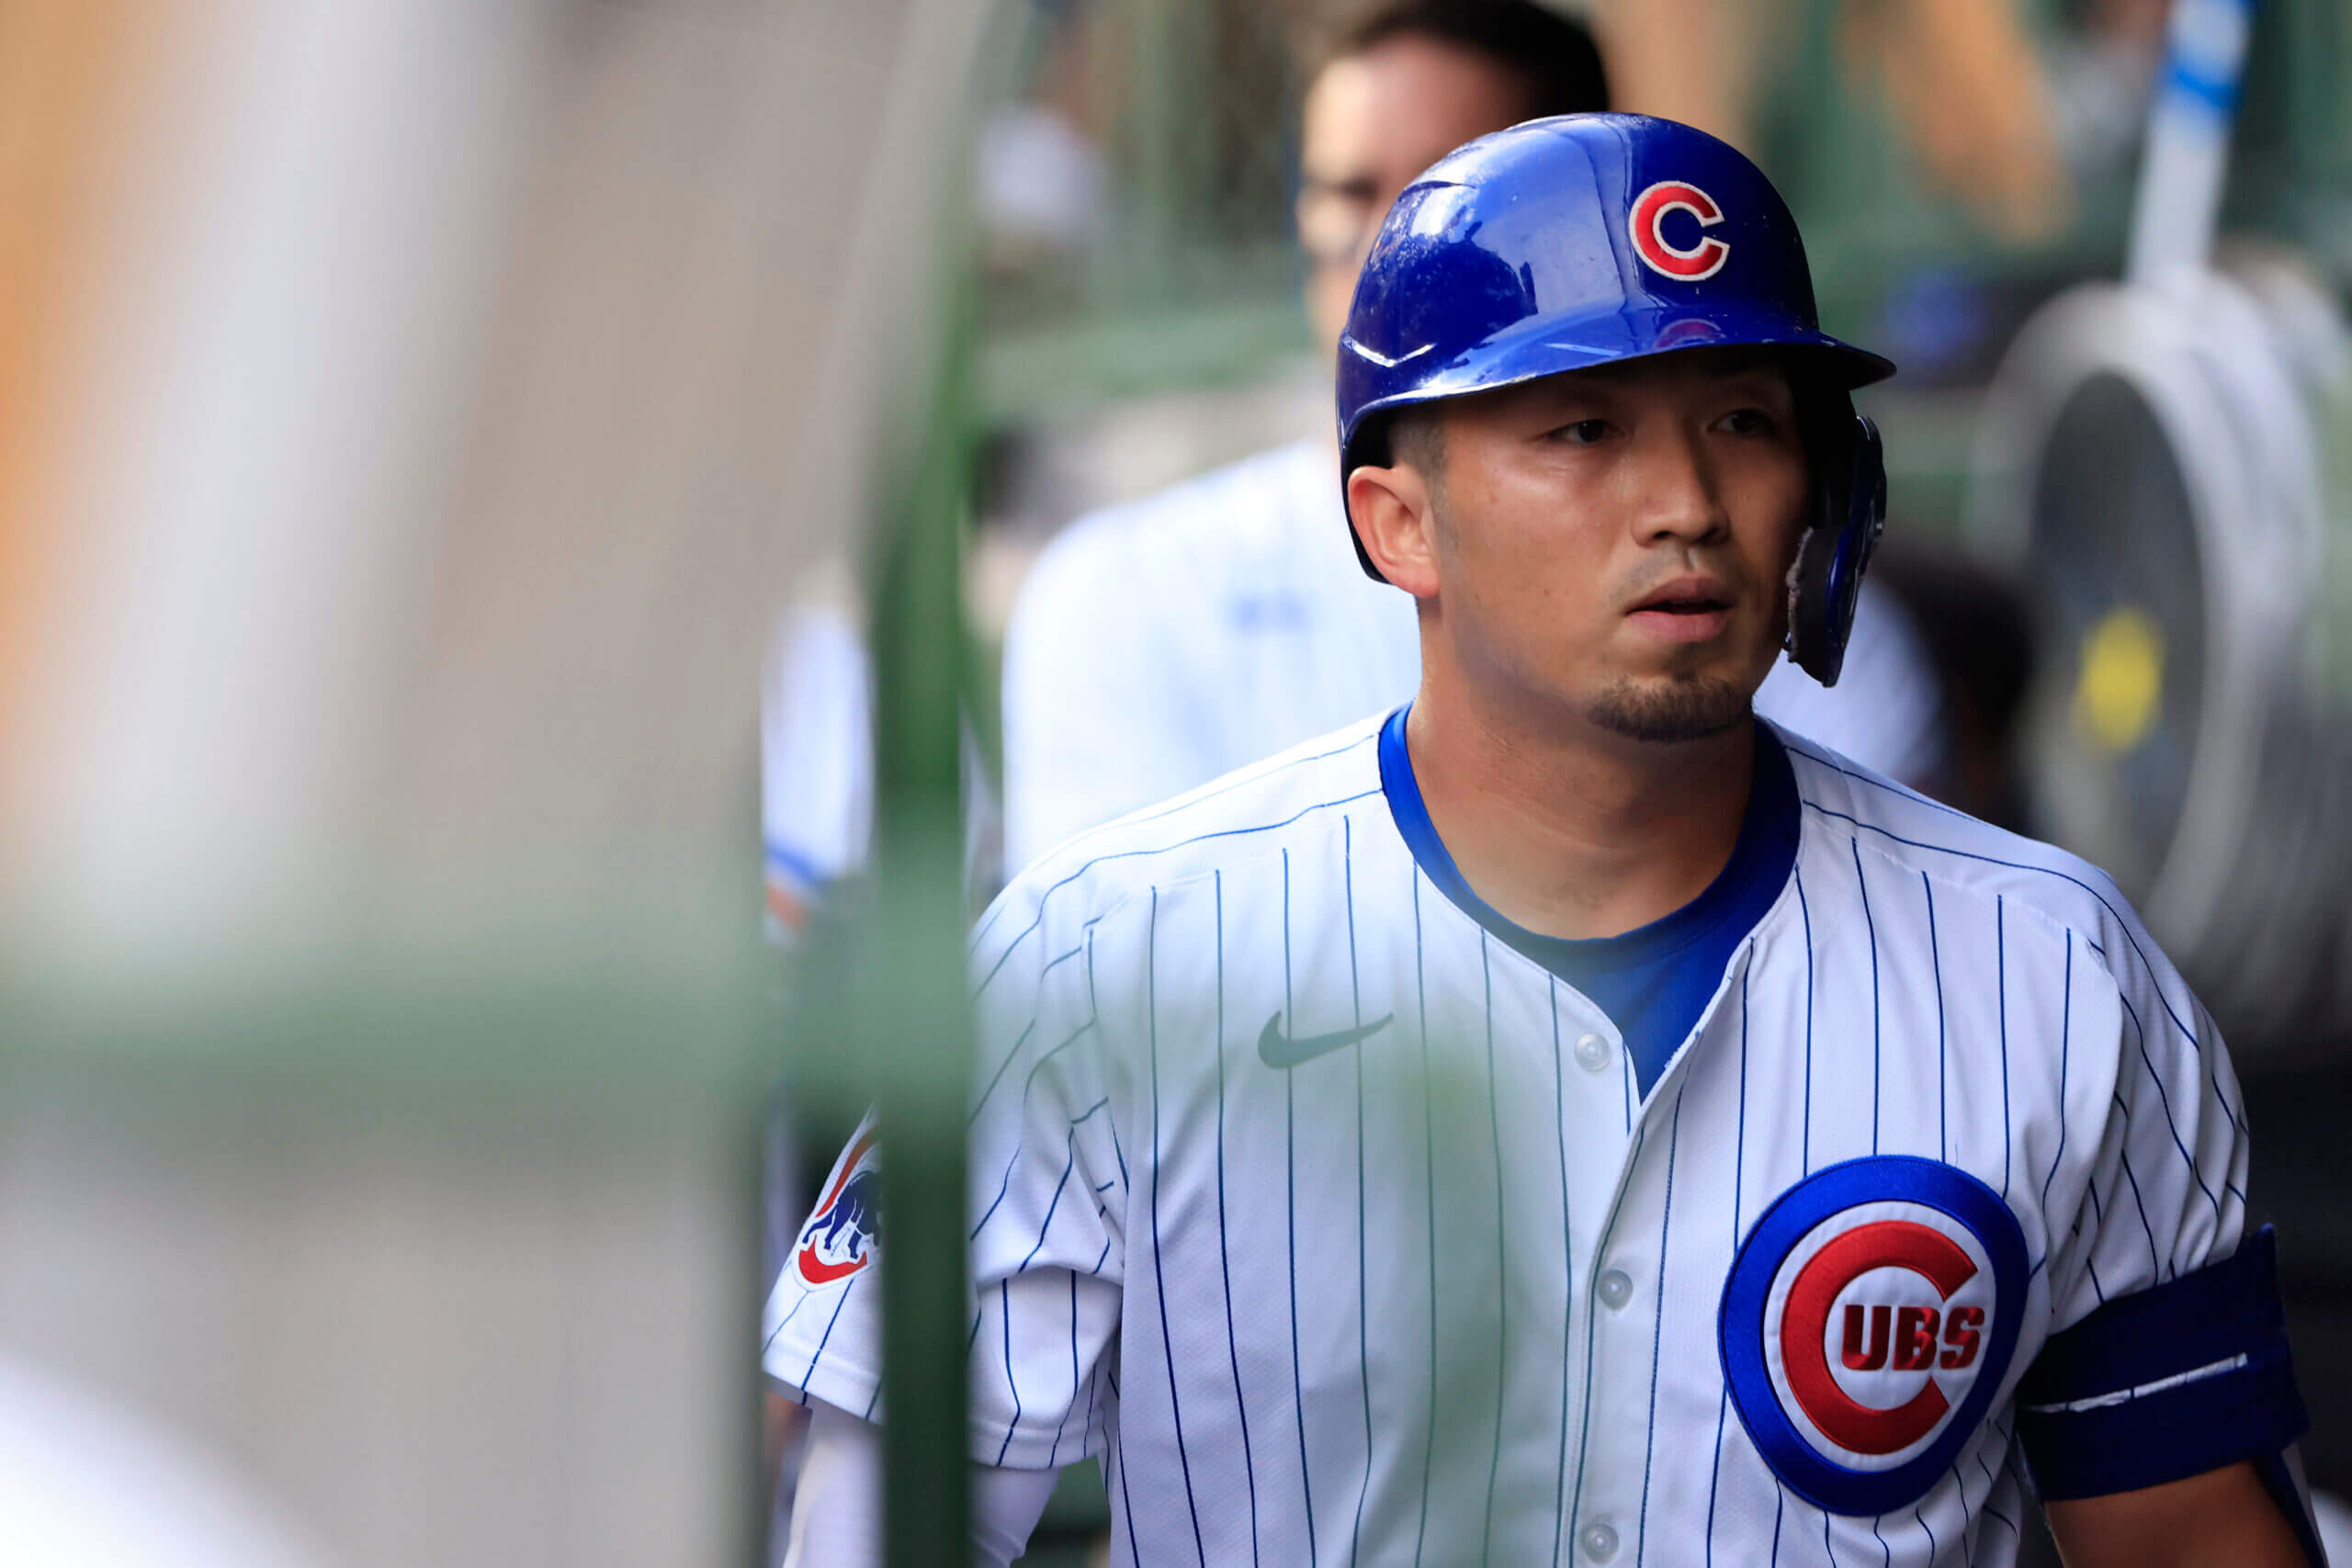 Four takeaways on the Cubs’ likely sell-off at the looming trade deadline